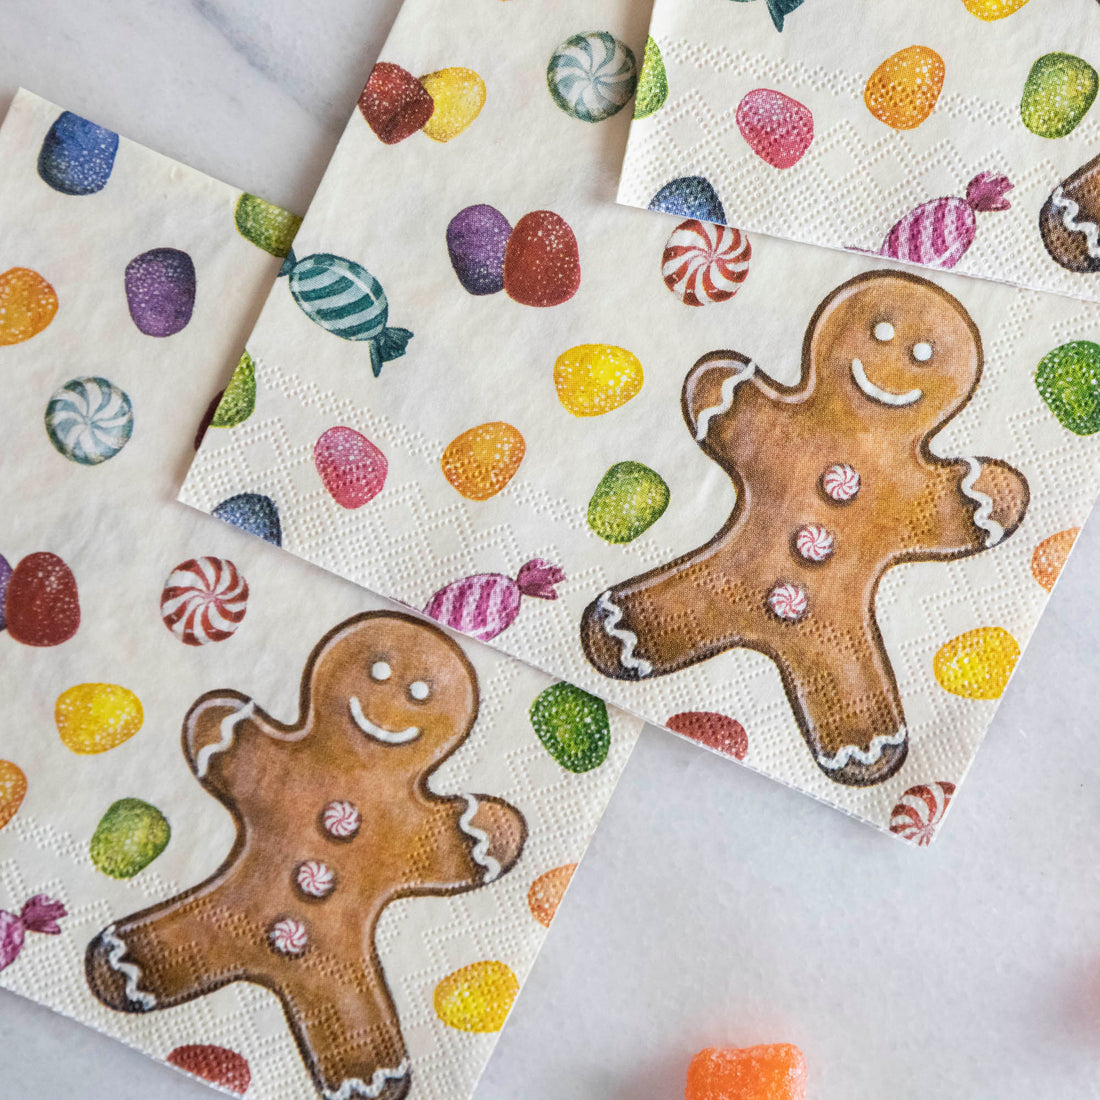 Hester &amp; Cook Gingerbread Napkins adding holiday cheer.